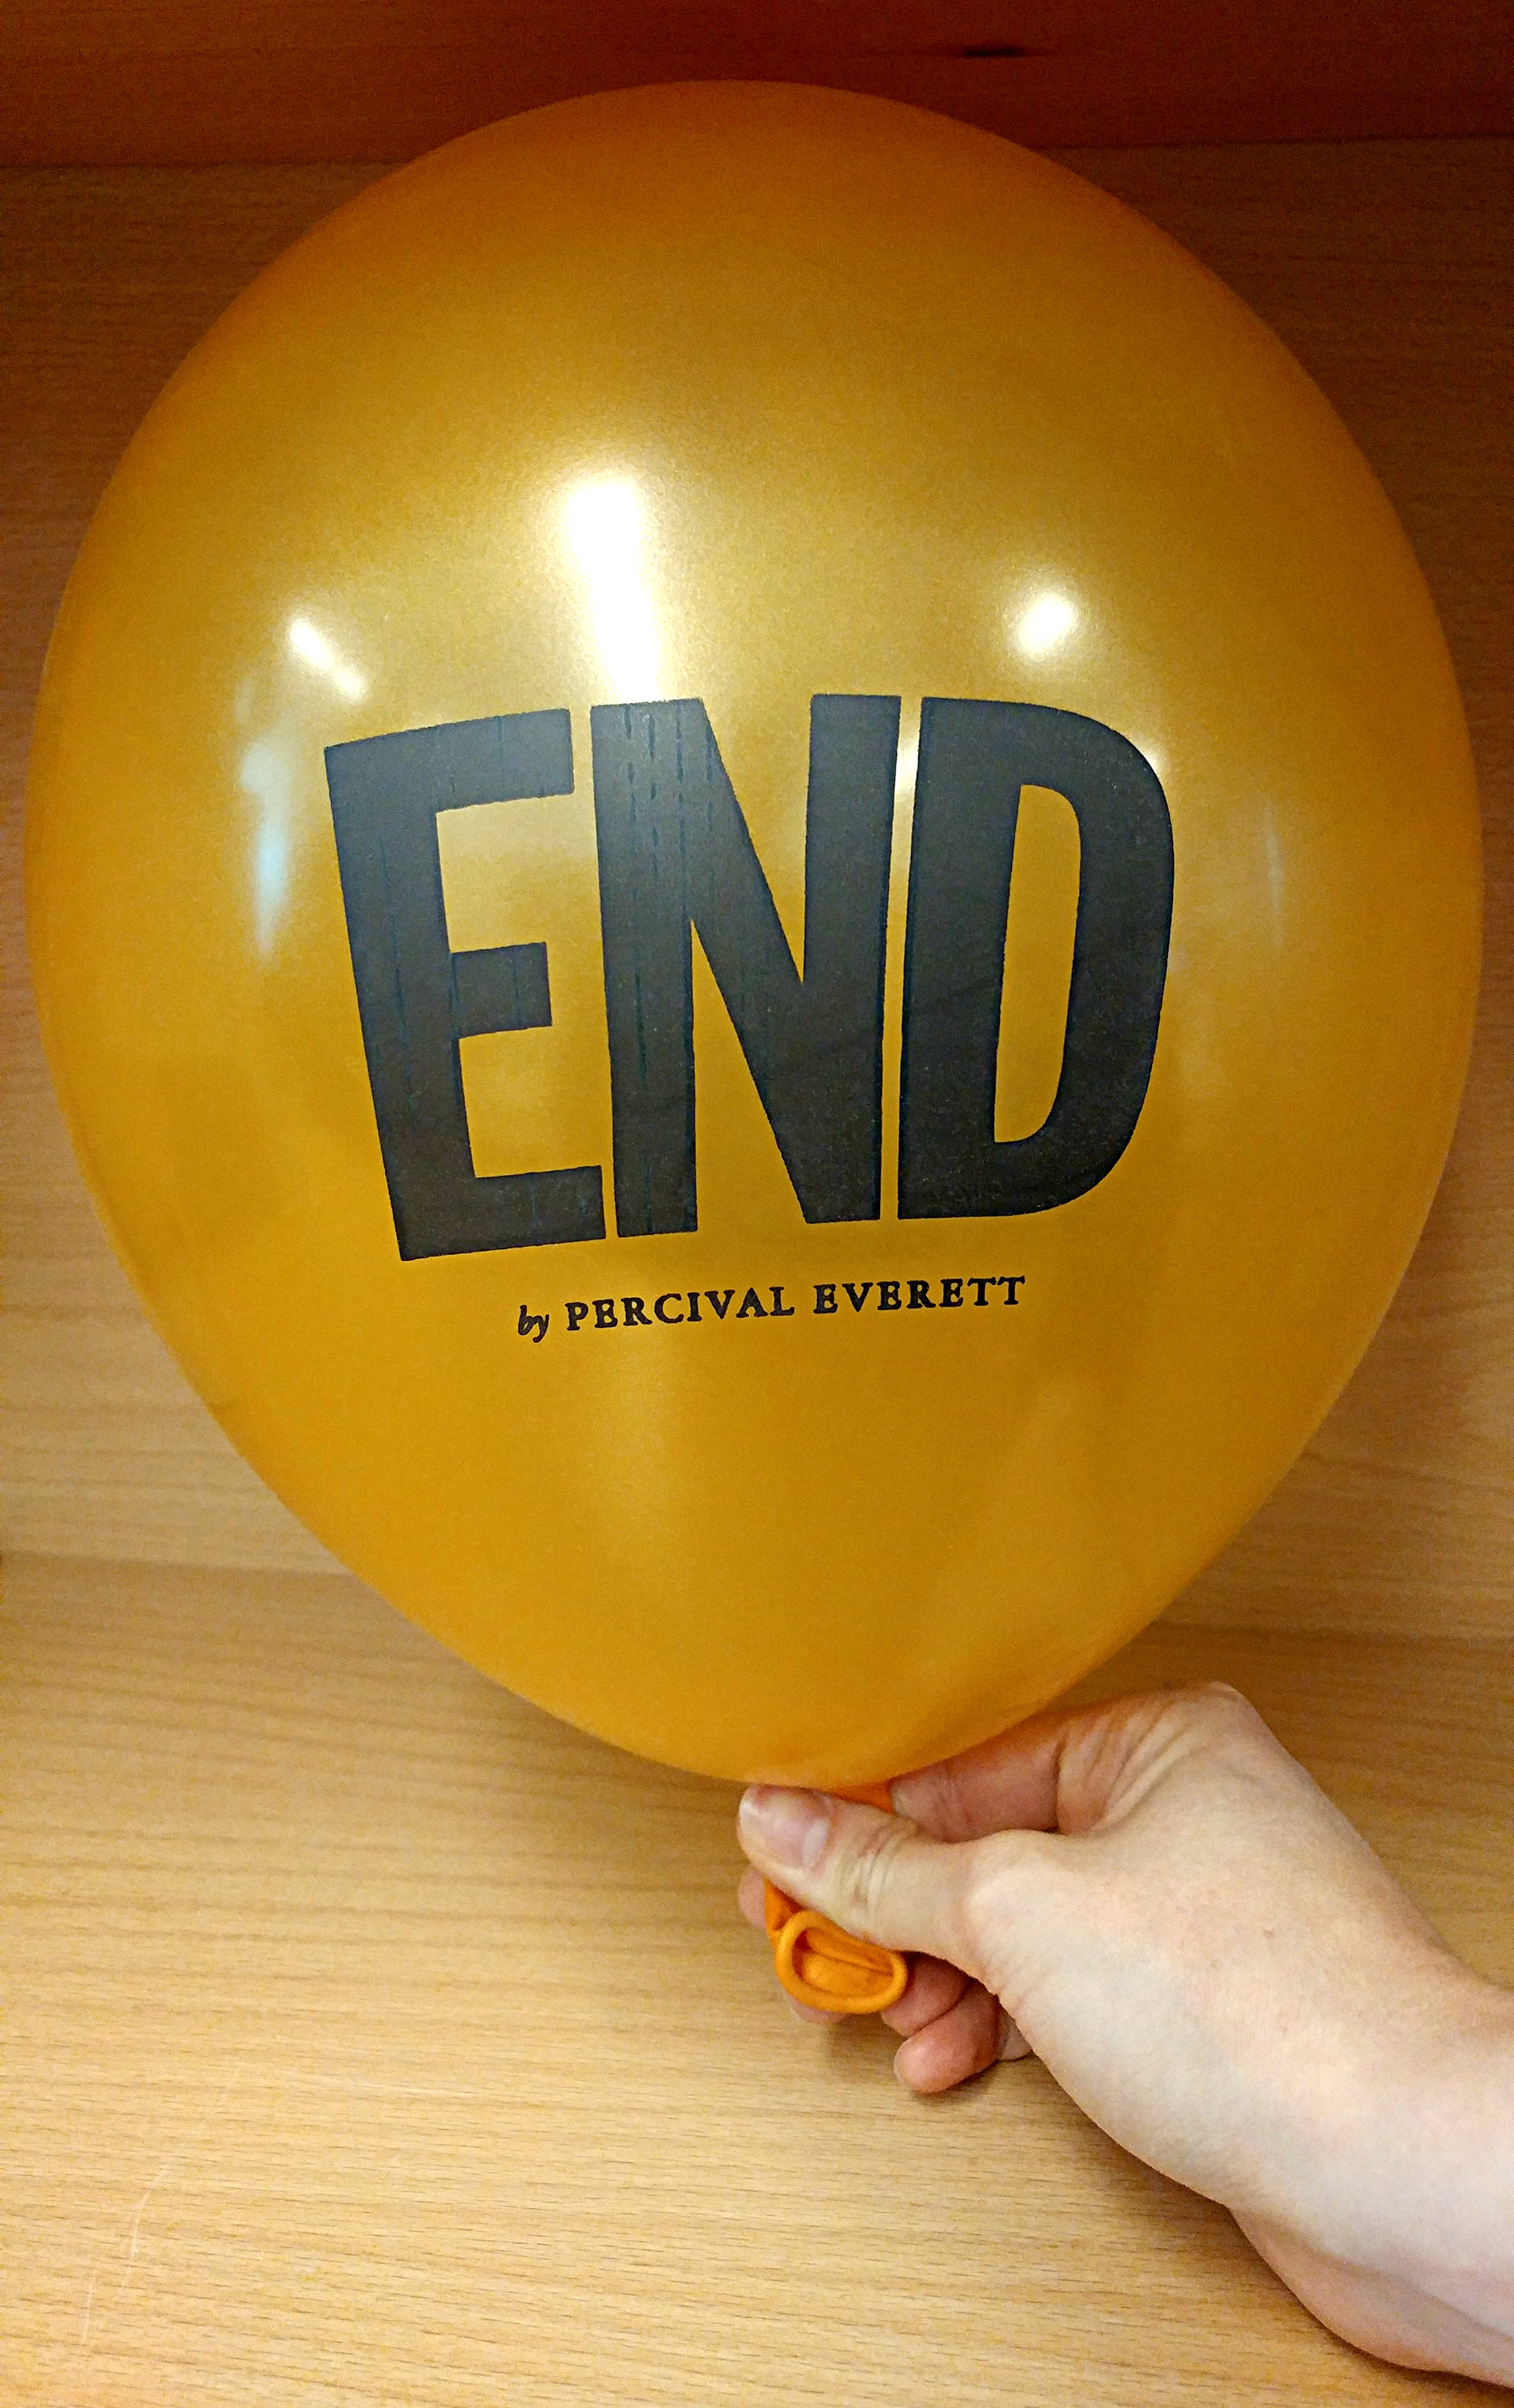 A golden balloon inflated with the text, "End by Percival Everett" printed on it. 